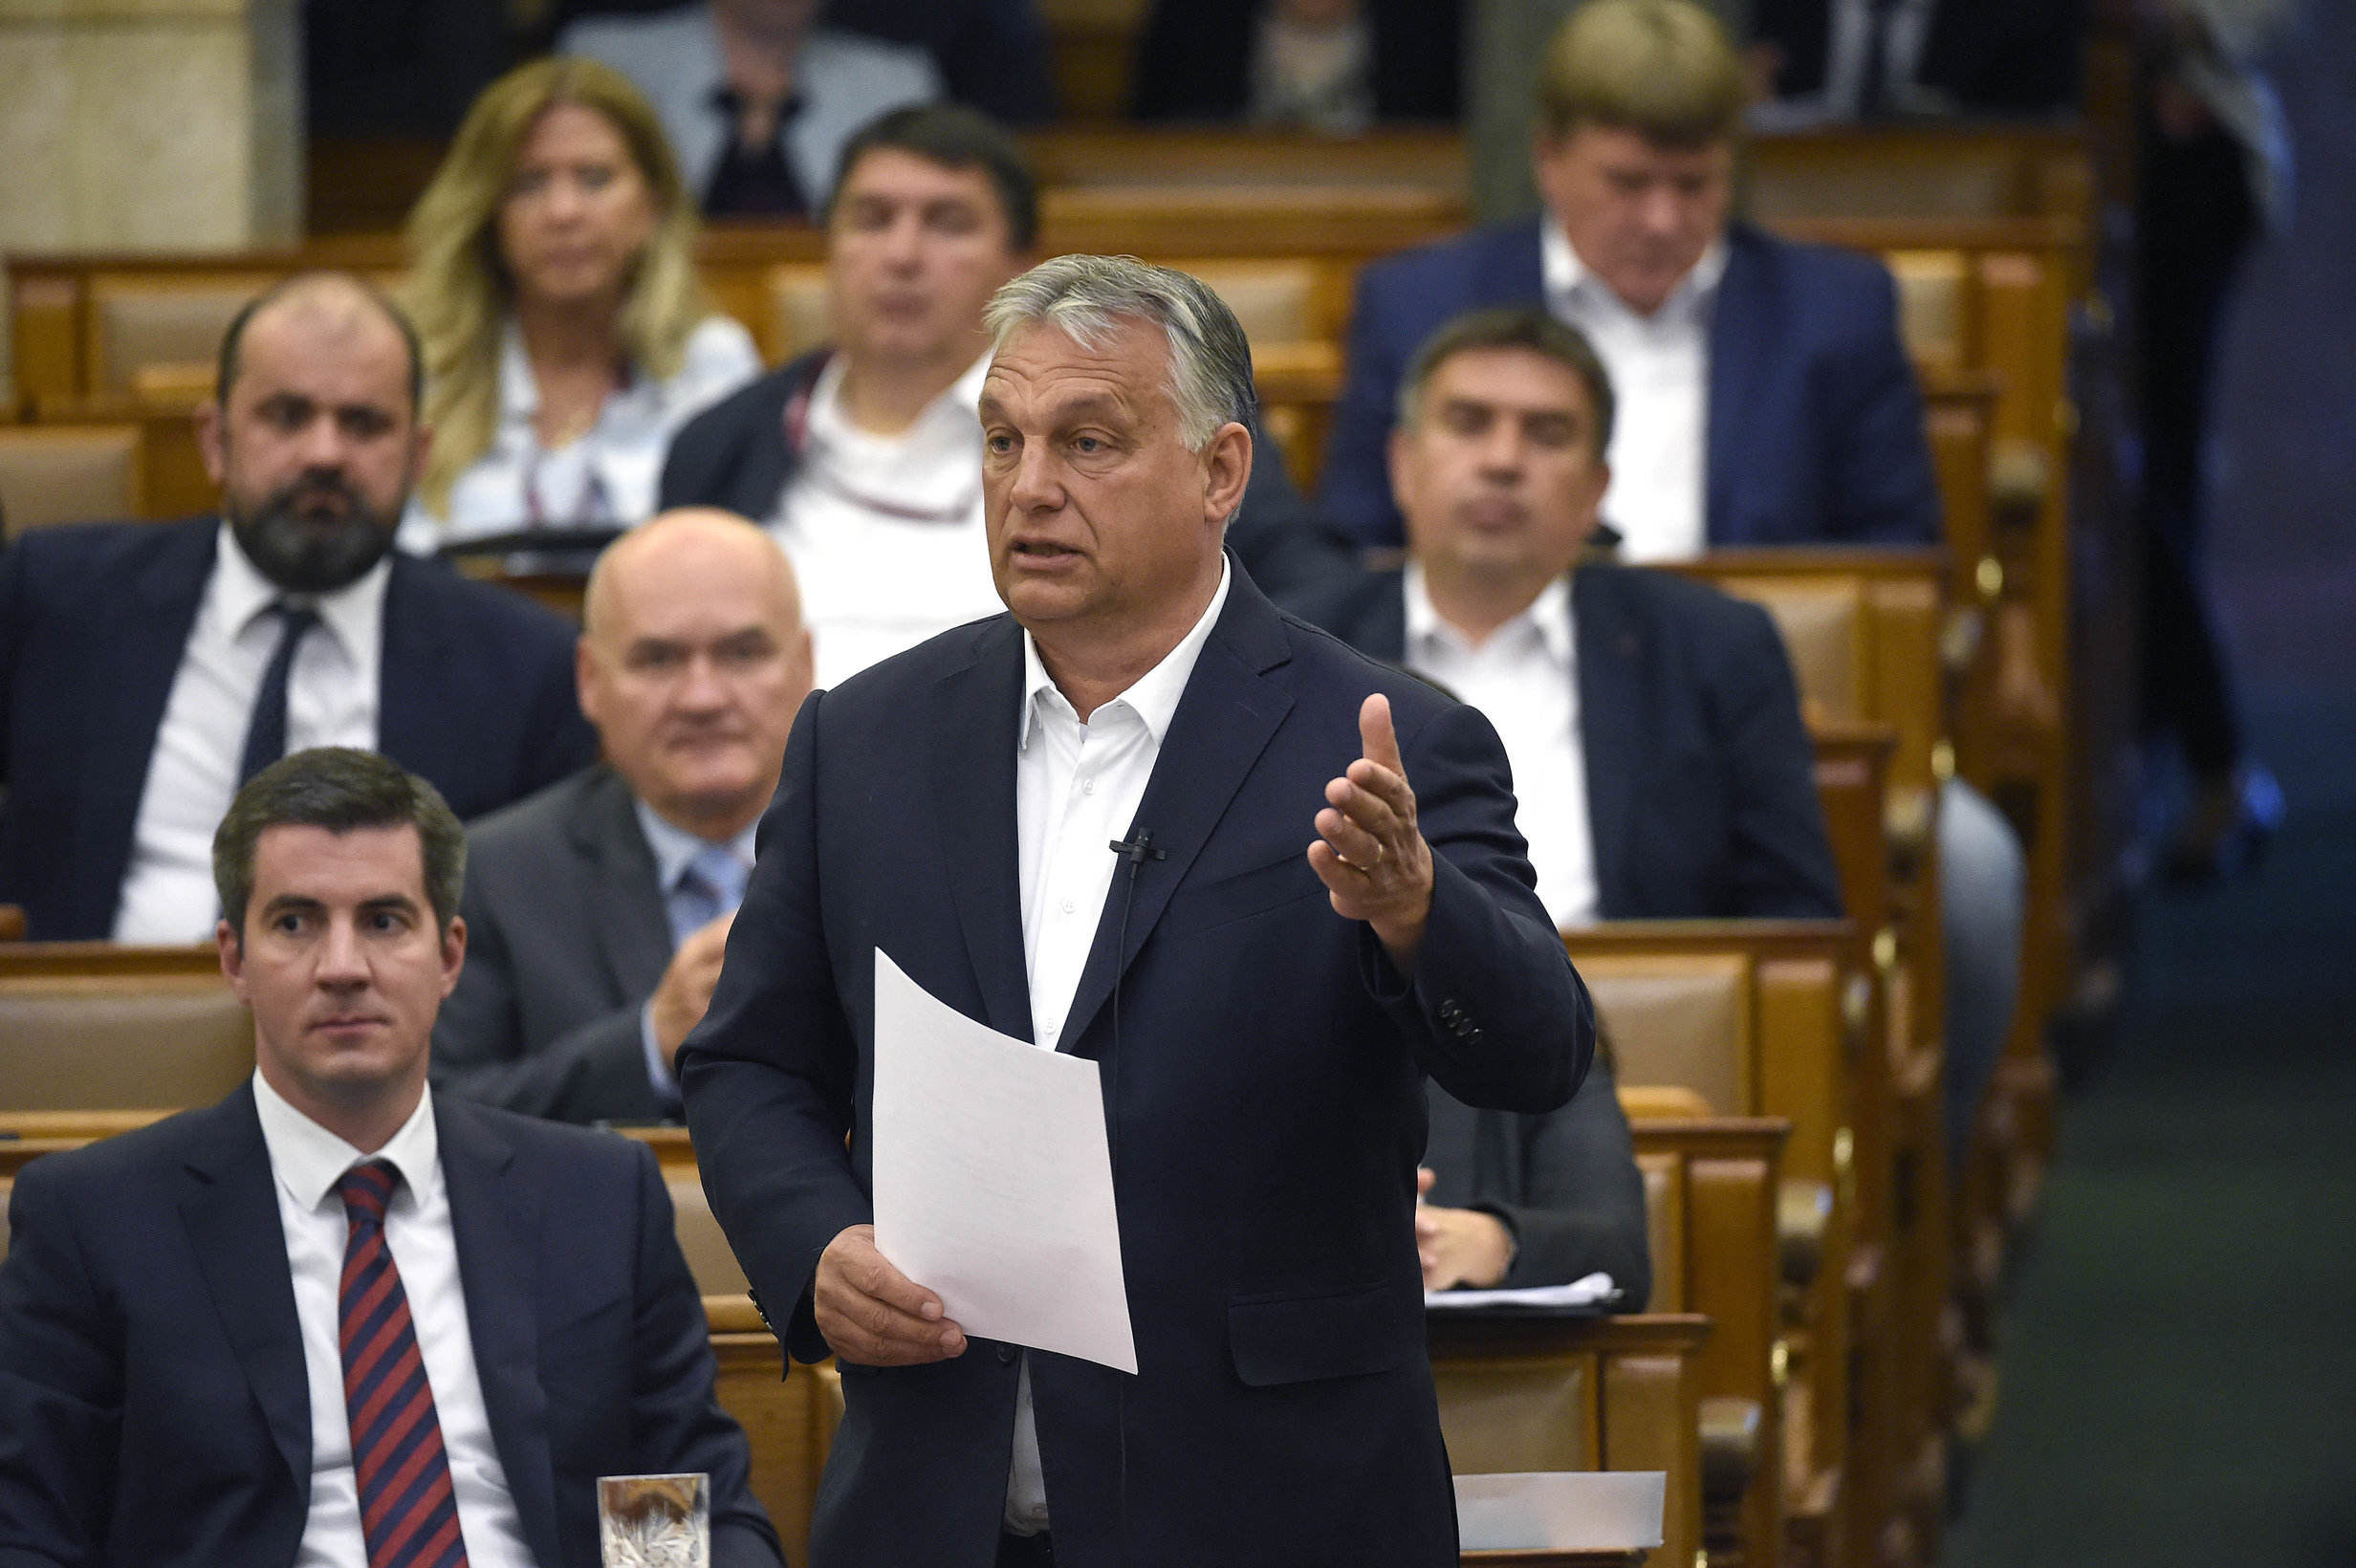 orbán in parliament